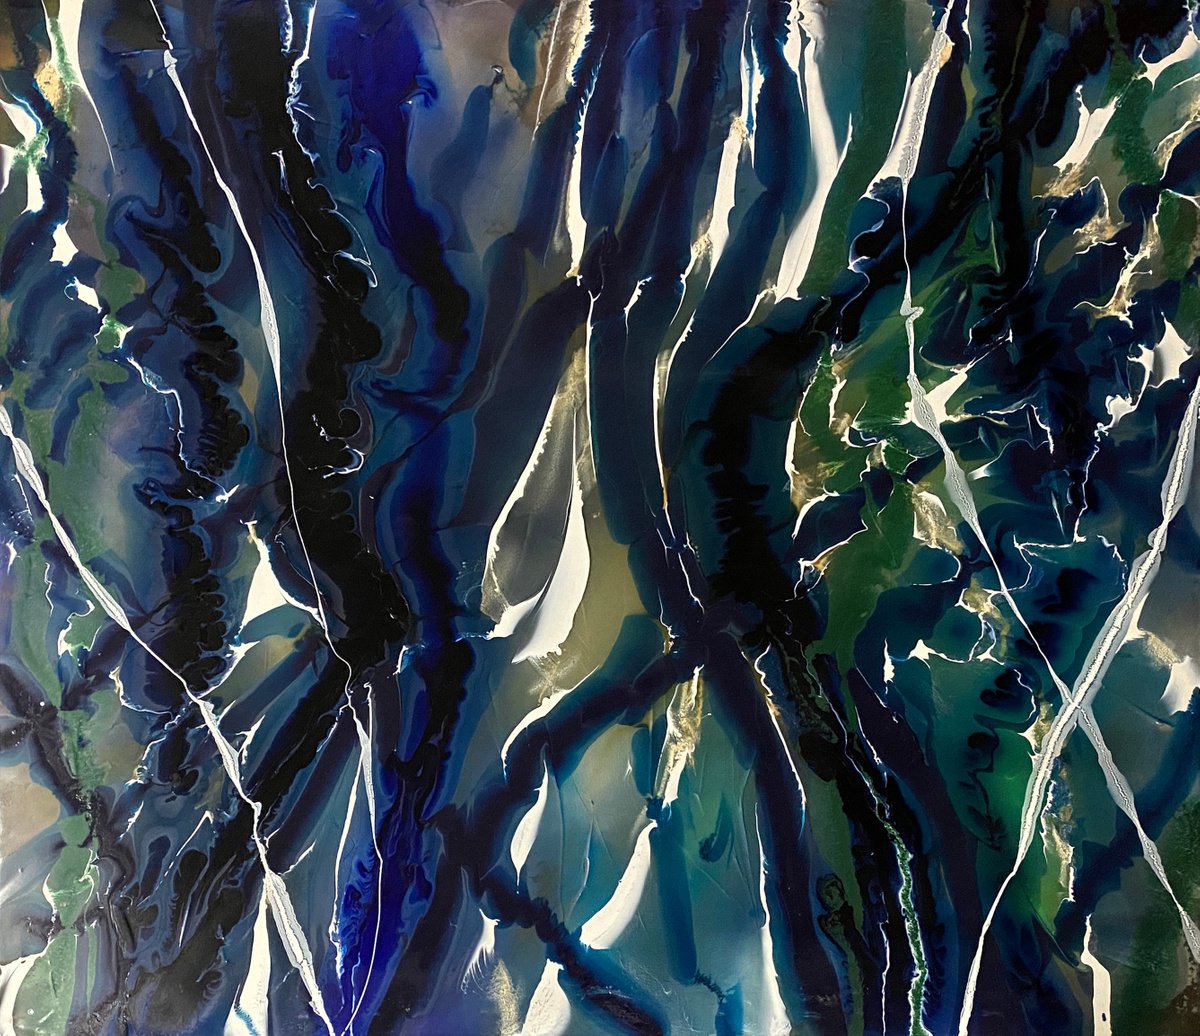 Original Painting - Resin art on large canvas - wall art - Rapids I by Robin Eckardt